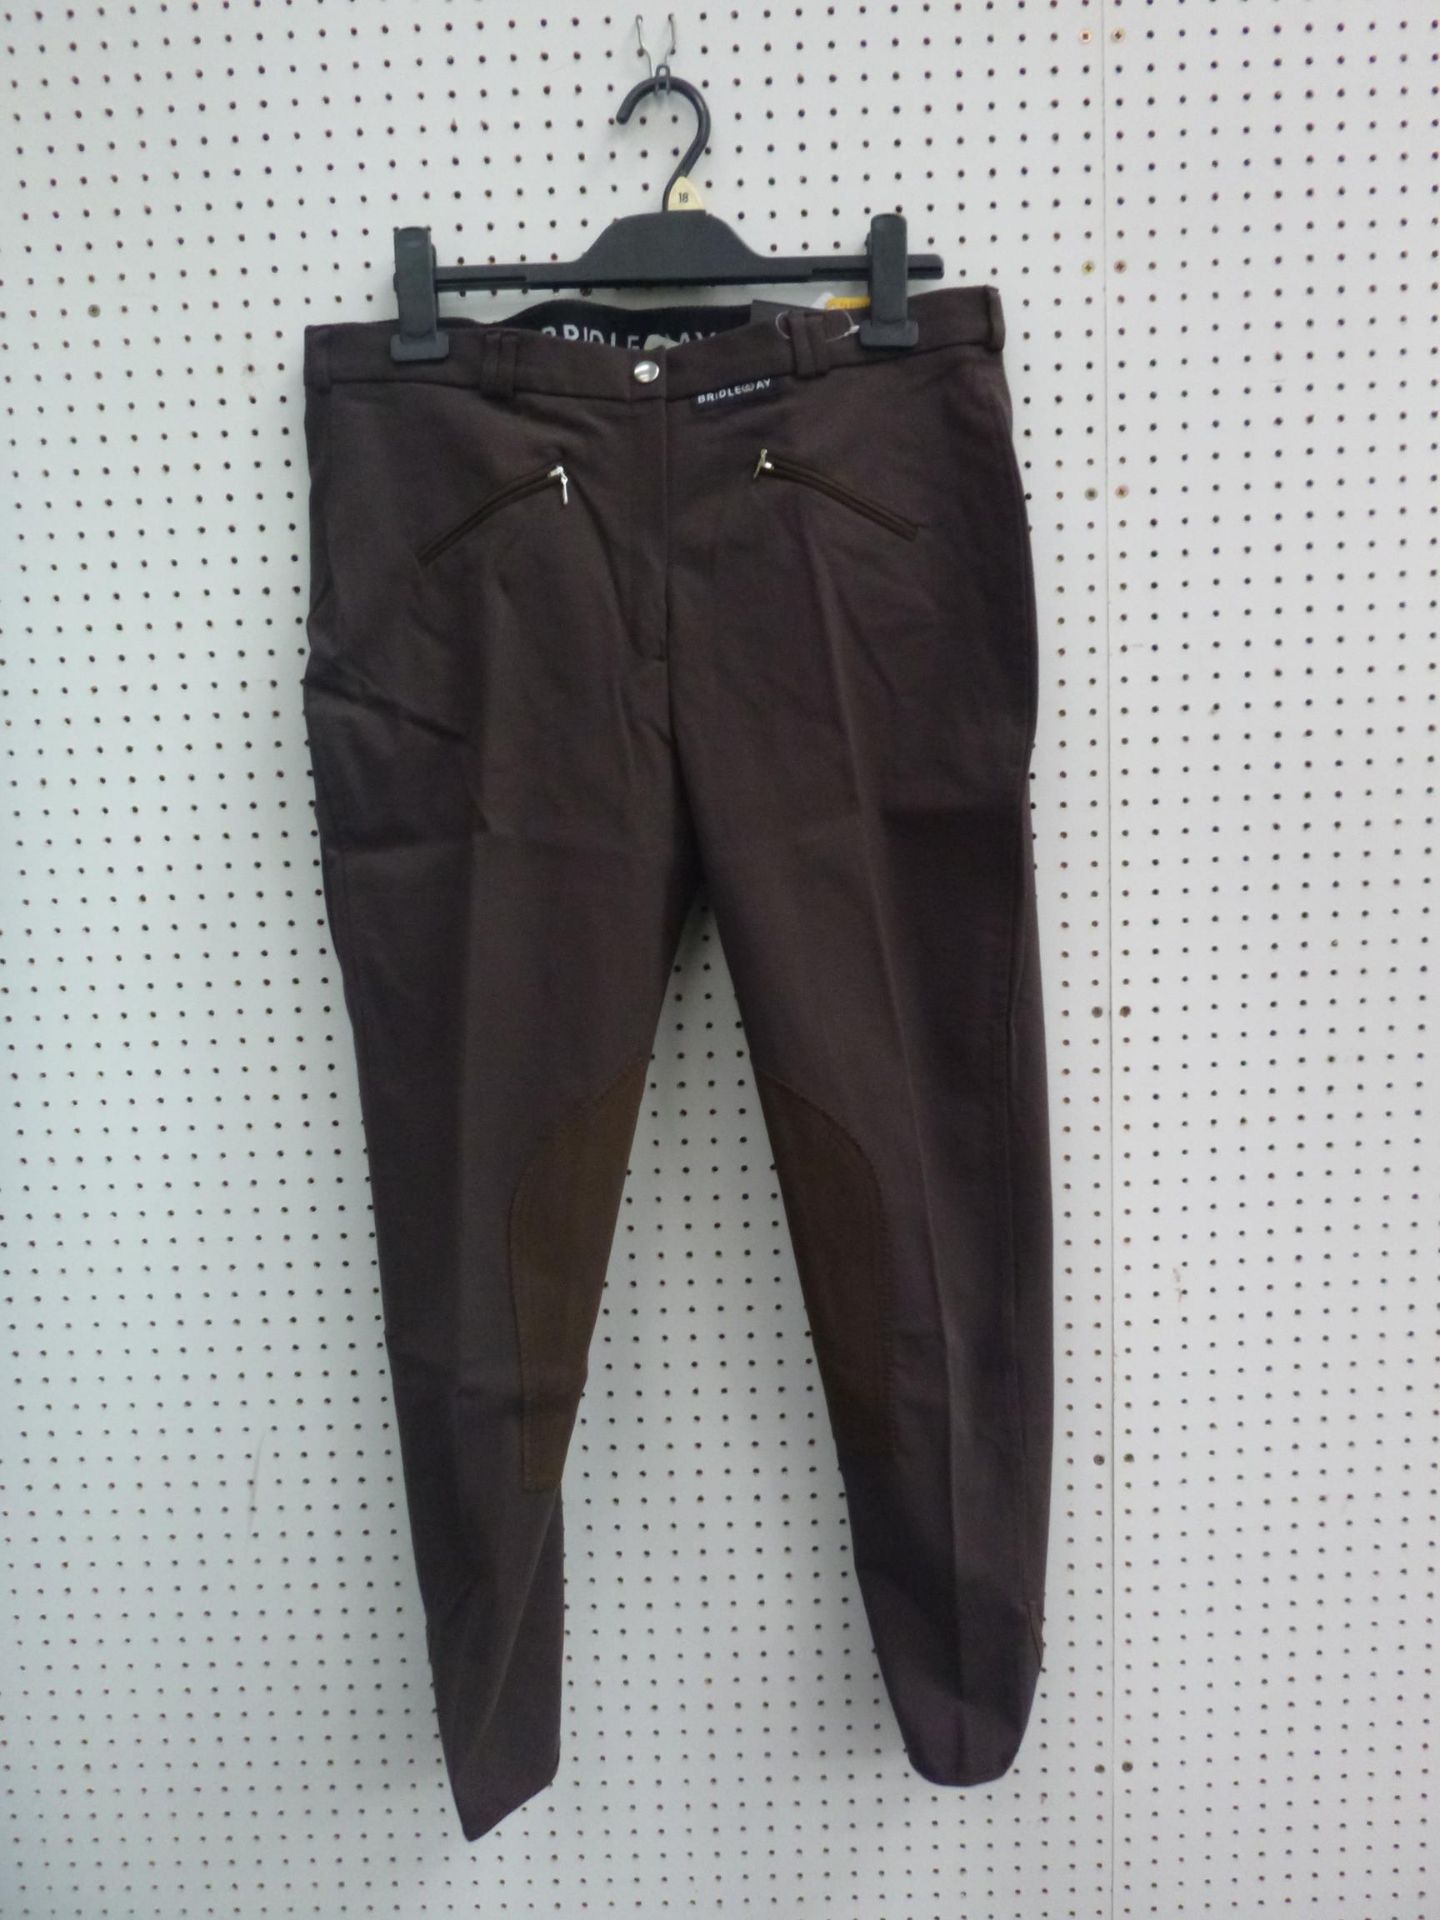 * Two pairs of new Bridleway Ladies Woven Cotton/Nylon Breeches size 38R, one Brown the other - Bild 3 aus 4